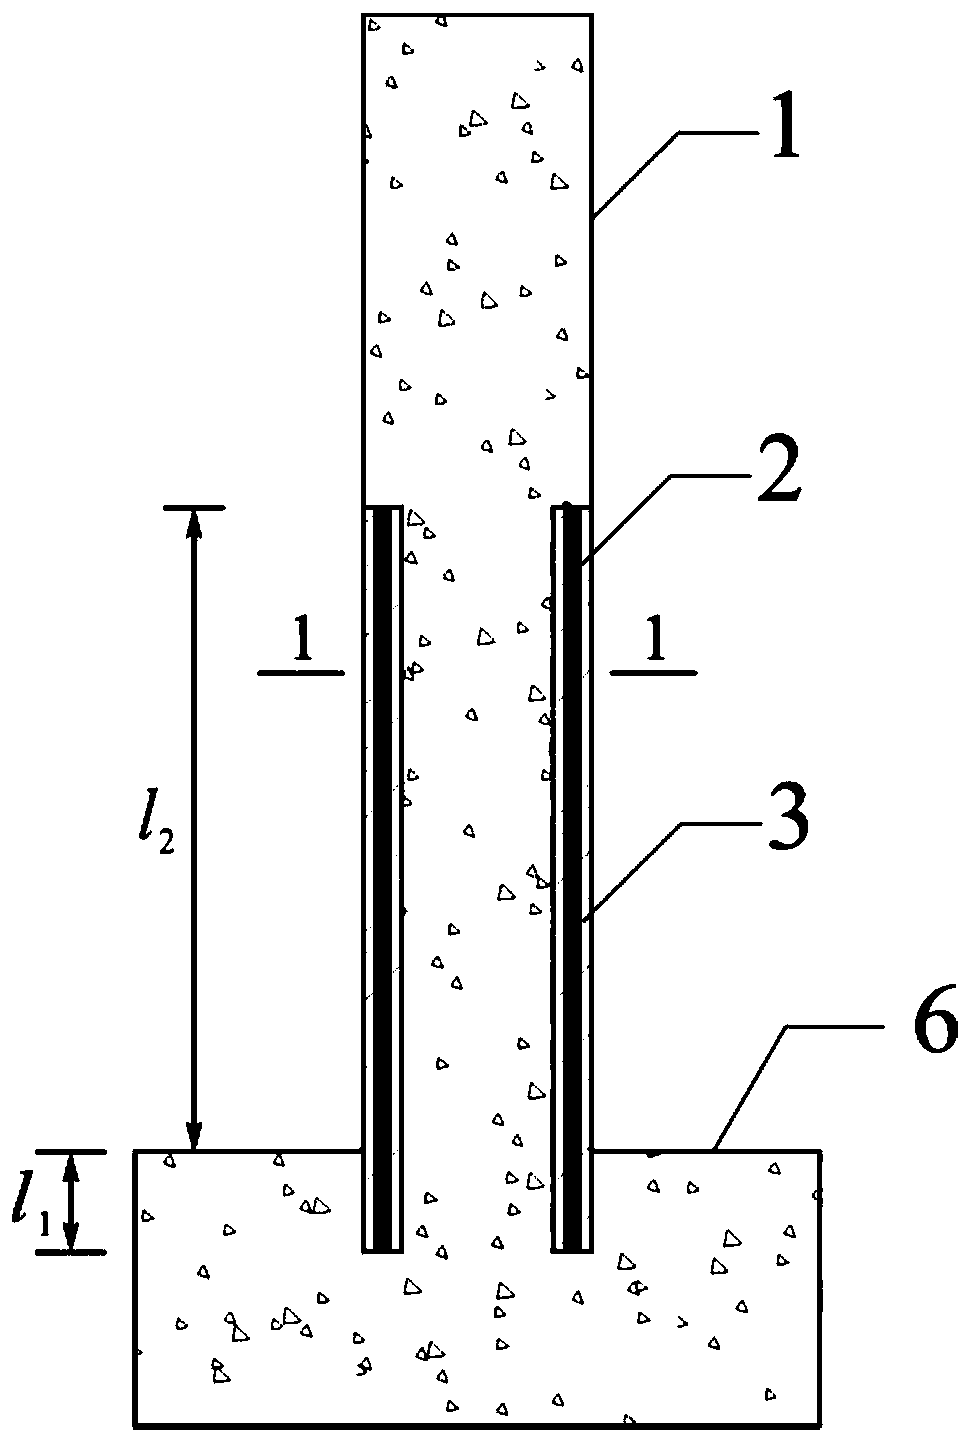 Reinforcement structure and reinforcement method of a reinforced concrete column